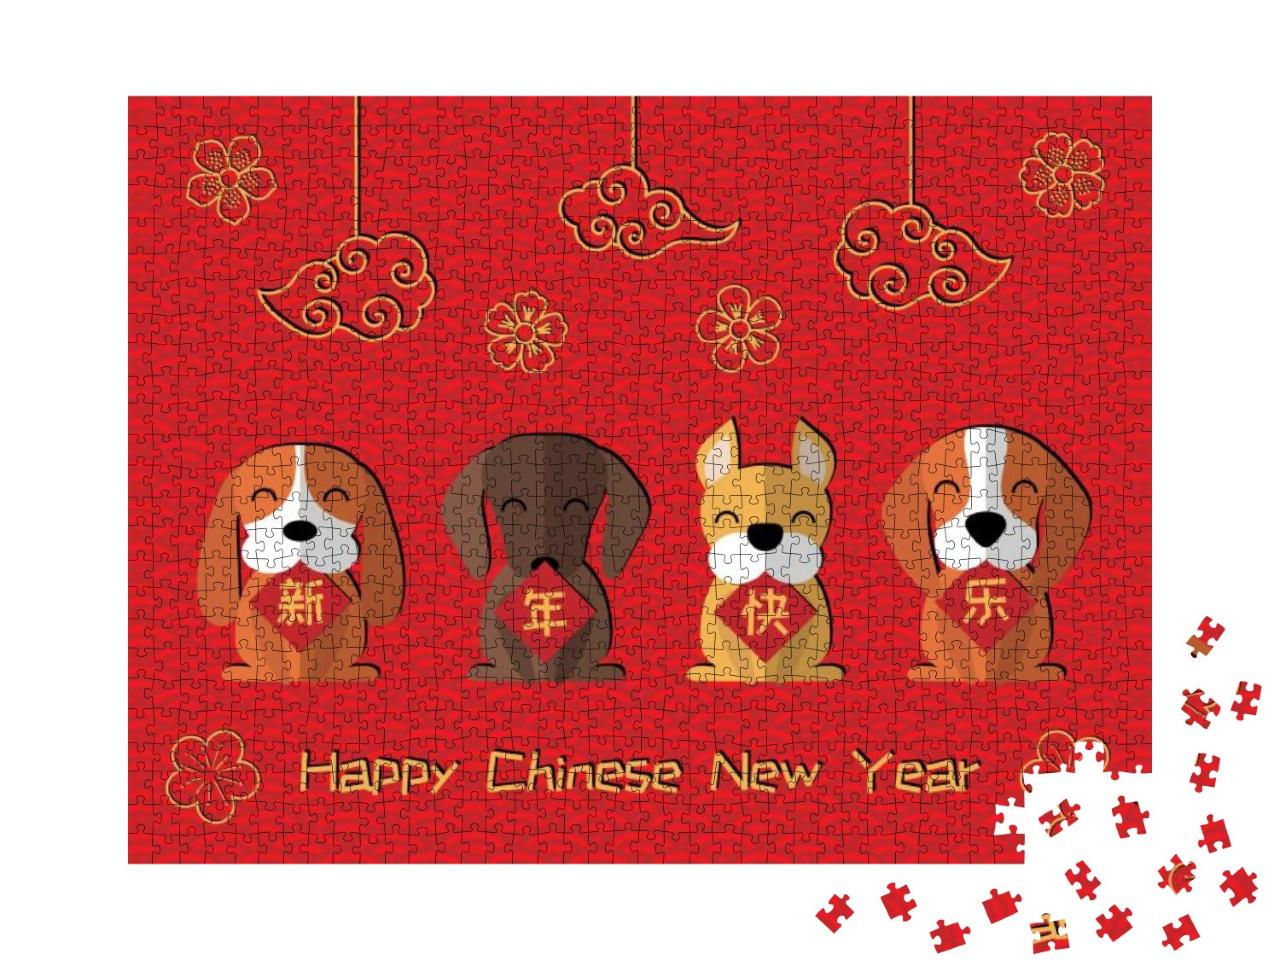 2018 Chinese New Year Greeting Card, Banner with C... Jigsaw Puzzle with 1000 pieces